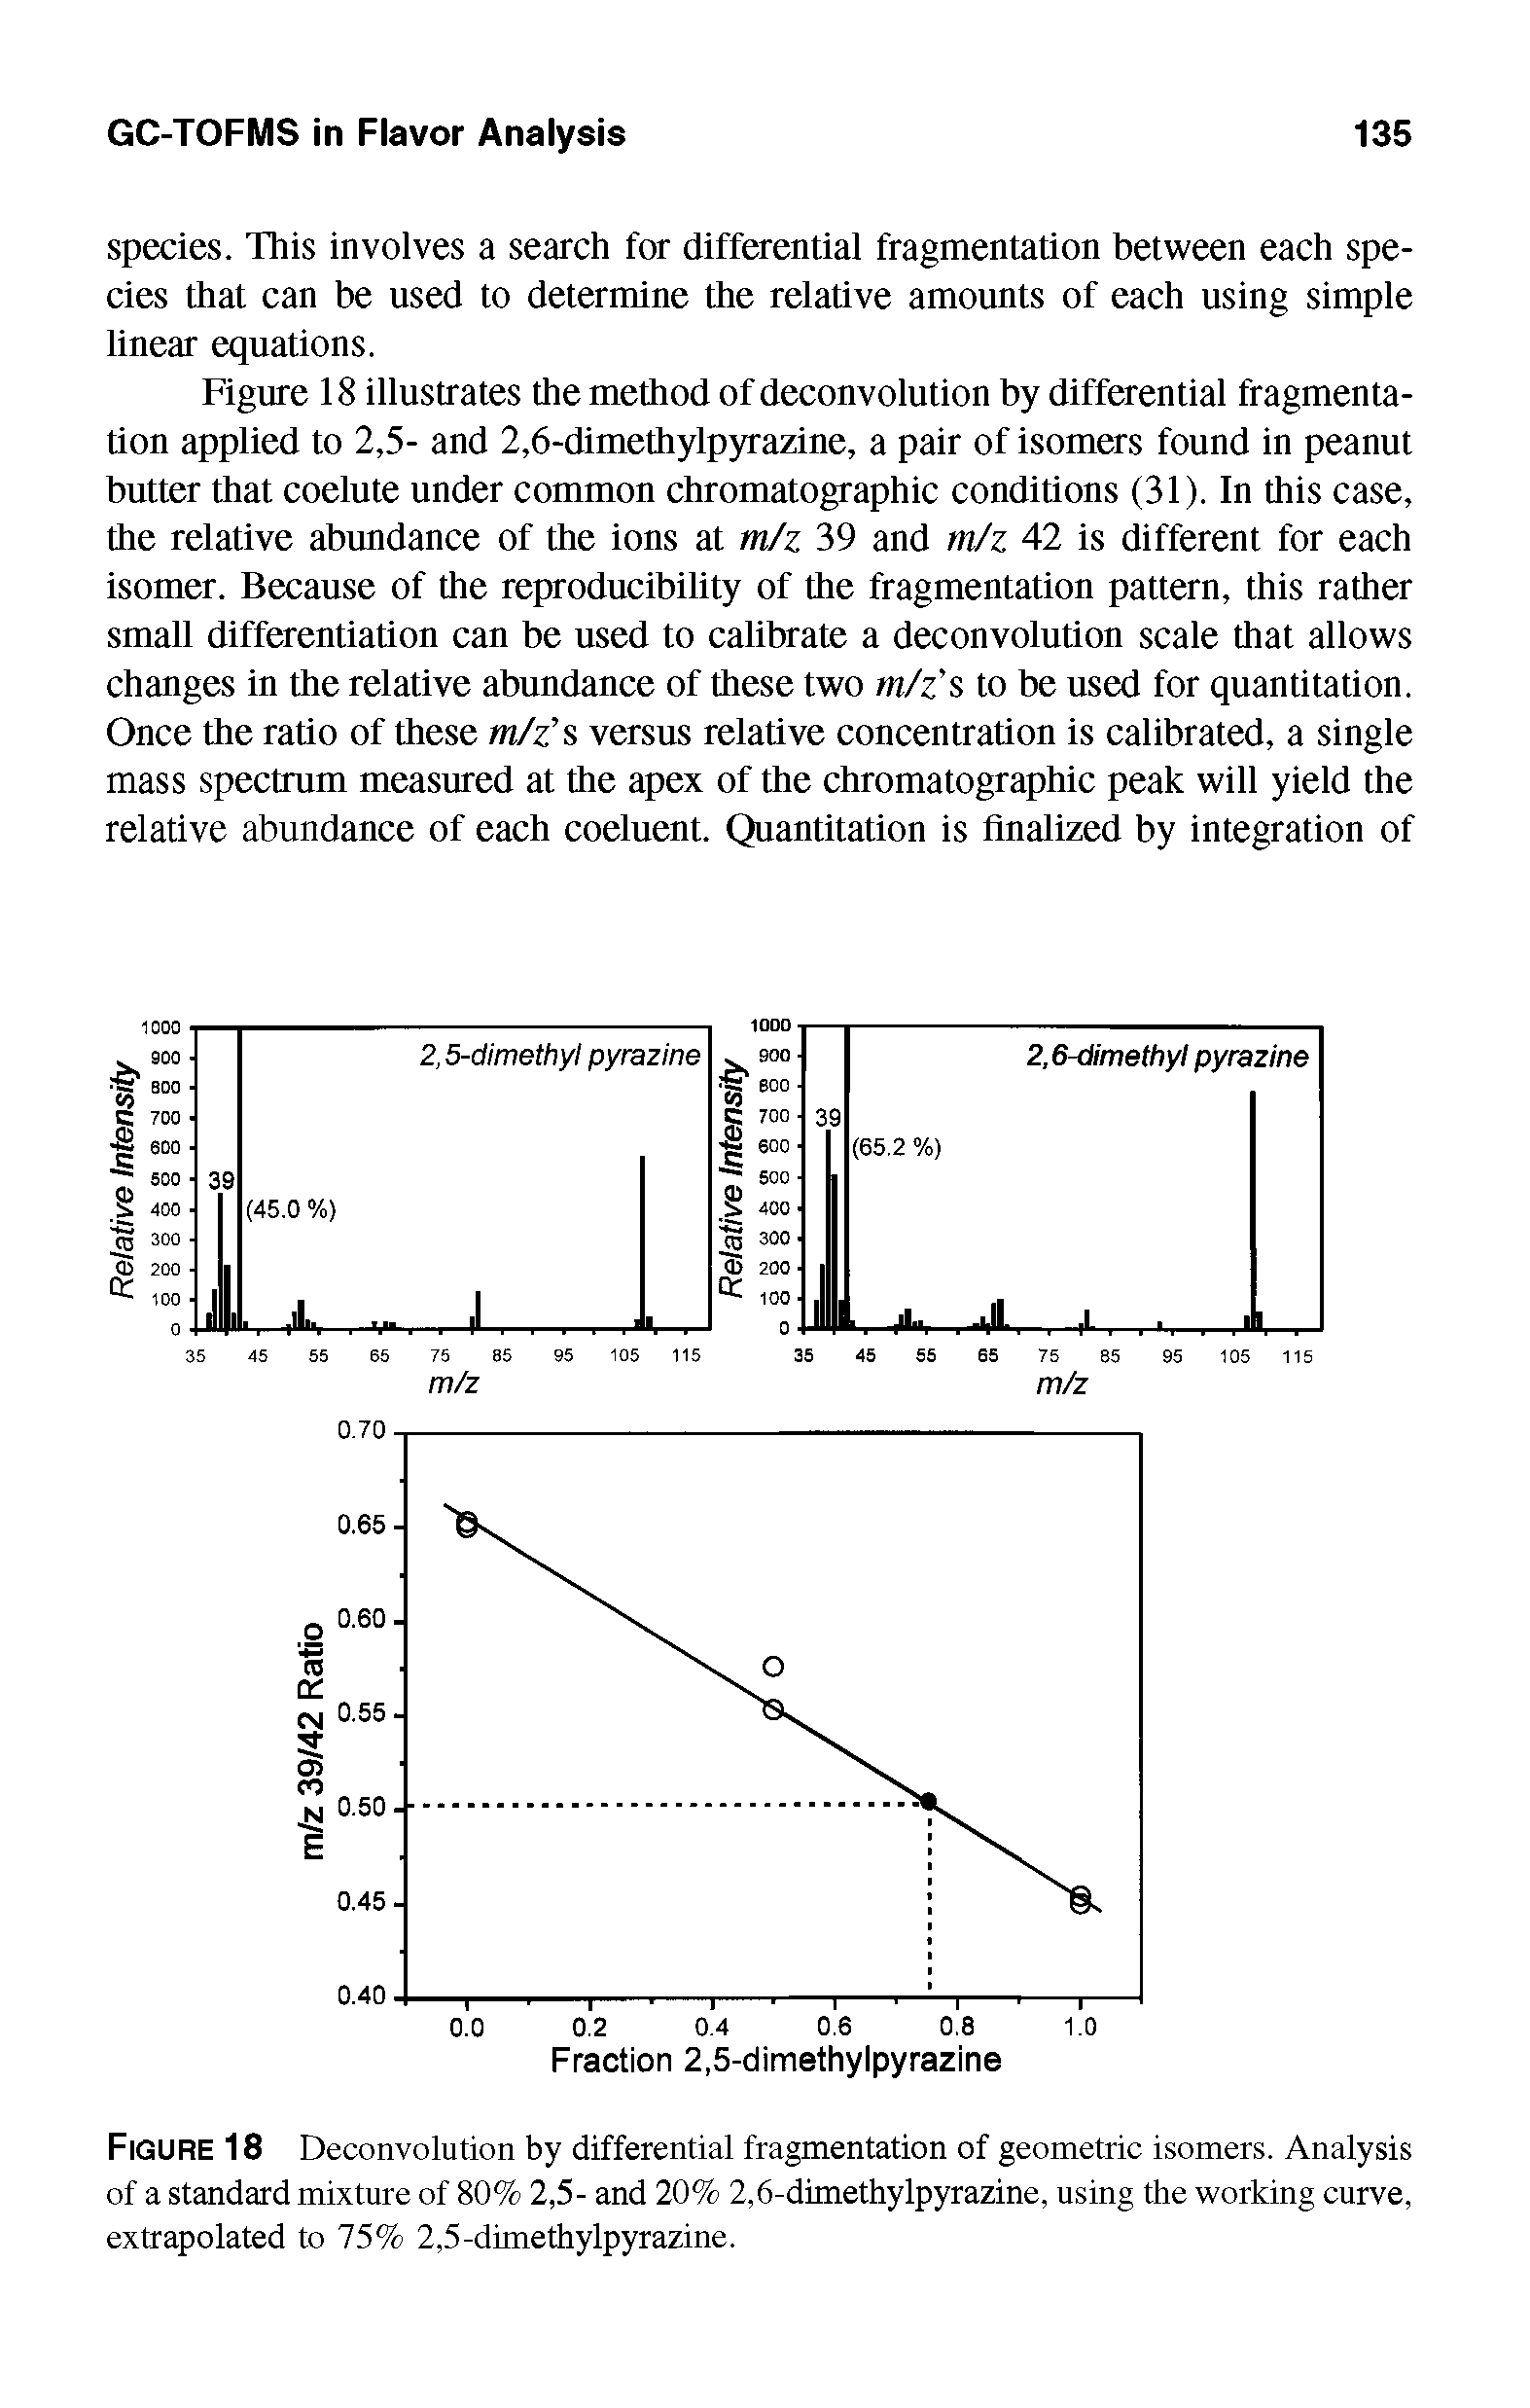 Figure 18 Deconvolution by differential fragmentation of geometric isomers. Analysis of a standard mixture of 80% 2,5- and 20% 2,6-dimethylpyrazine, using the working curve, extrapolated to 75% 2,5-dimethylp5U azine.